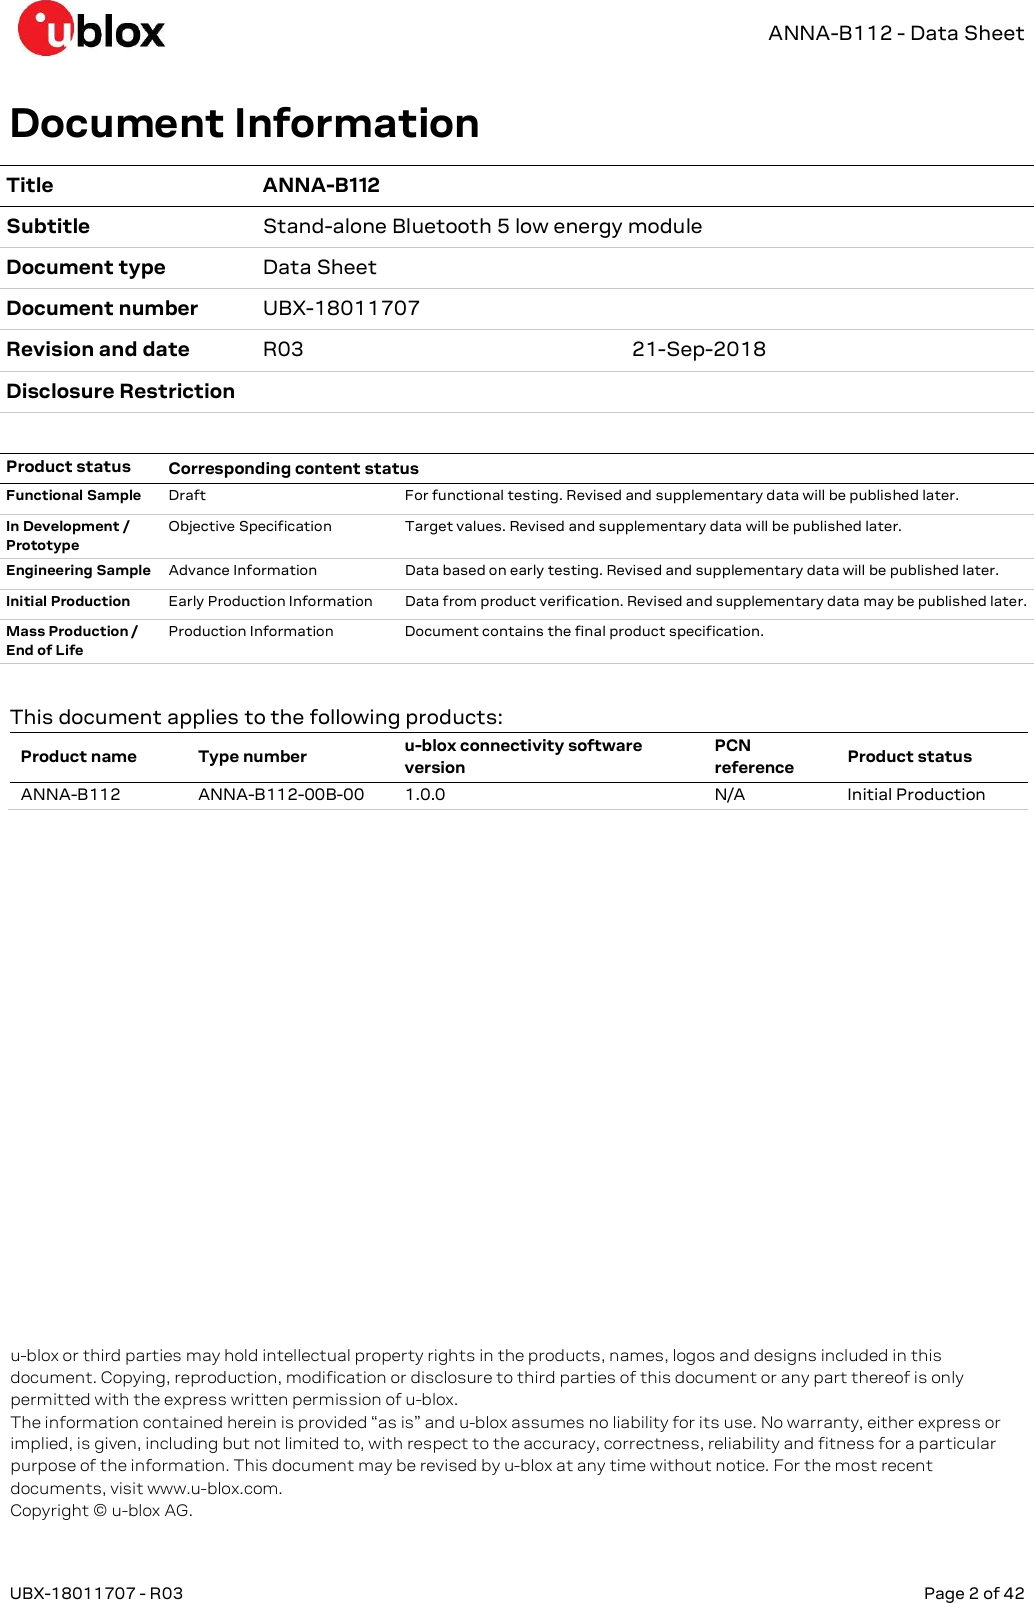   ANNA-B112 - Data Sheet UBX-18011707 - R03   Page 2 of 42      Document Information Title  ANNA-B112 Subtitle  Stand-alone Bluetooth 5 low energy module Document type  Data Sheet Document number  UBX-18011707   Revision and date  R03  21-Sep-2018 Disclosure Restriction    Product status  Corresponding content status  Functional Sample  Draft  For functional testing. Revised and supplementary data will be published later. In Development / Prototype Objective Specification  Target values. Revised and supplementary data will be published later. Engineering Sample  Advance Information  Data based on early testing. Revised and supplementary data will be published later. Initial Production  Early Production Information  Data from product verification. Revised and supplementary data may be published later. Mass Production /  End of Life Production Information  Document contains the final product specification.  This document applies to the following products: Product name  Type number  u-blox connectivity software version PCN reference  Product status ANNA-B112  ANNA-B112-00B-00  1.0.0  N/A  Initial Production   u-blox or third parties may hold intellectual property rights in the products, names, logos and designs included in this document. Copying, reproduction, modification or disclosure to third parties of this document or any part thereof is only permitted with the express written permission of u-blox. The information contained herein is provided “as is” and u-blox assumes no liability for its use. No warranty, either express or implied, is given, including but not limited to, with respect to the accuracy, correctness, reliability and fitness for a particular purpose of the information. This document may be revised by u-blox at any time without notice. For the most recent documents, visit www.u-blox.com.  Copyright © u-blox AG. 